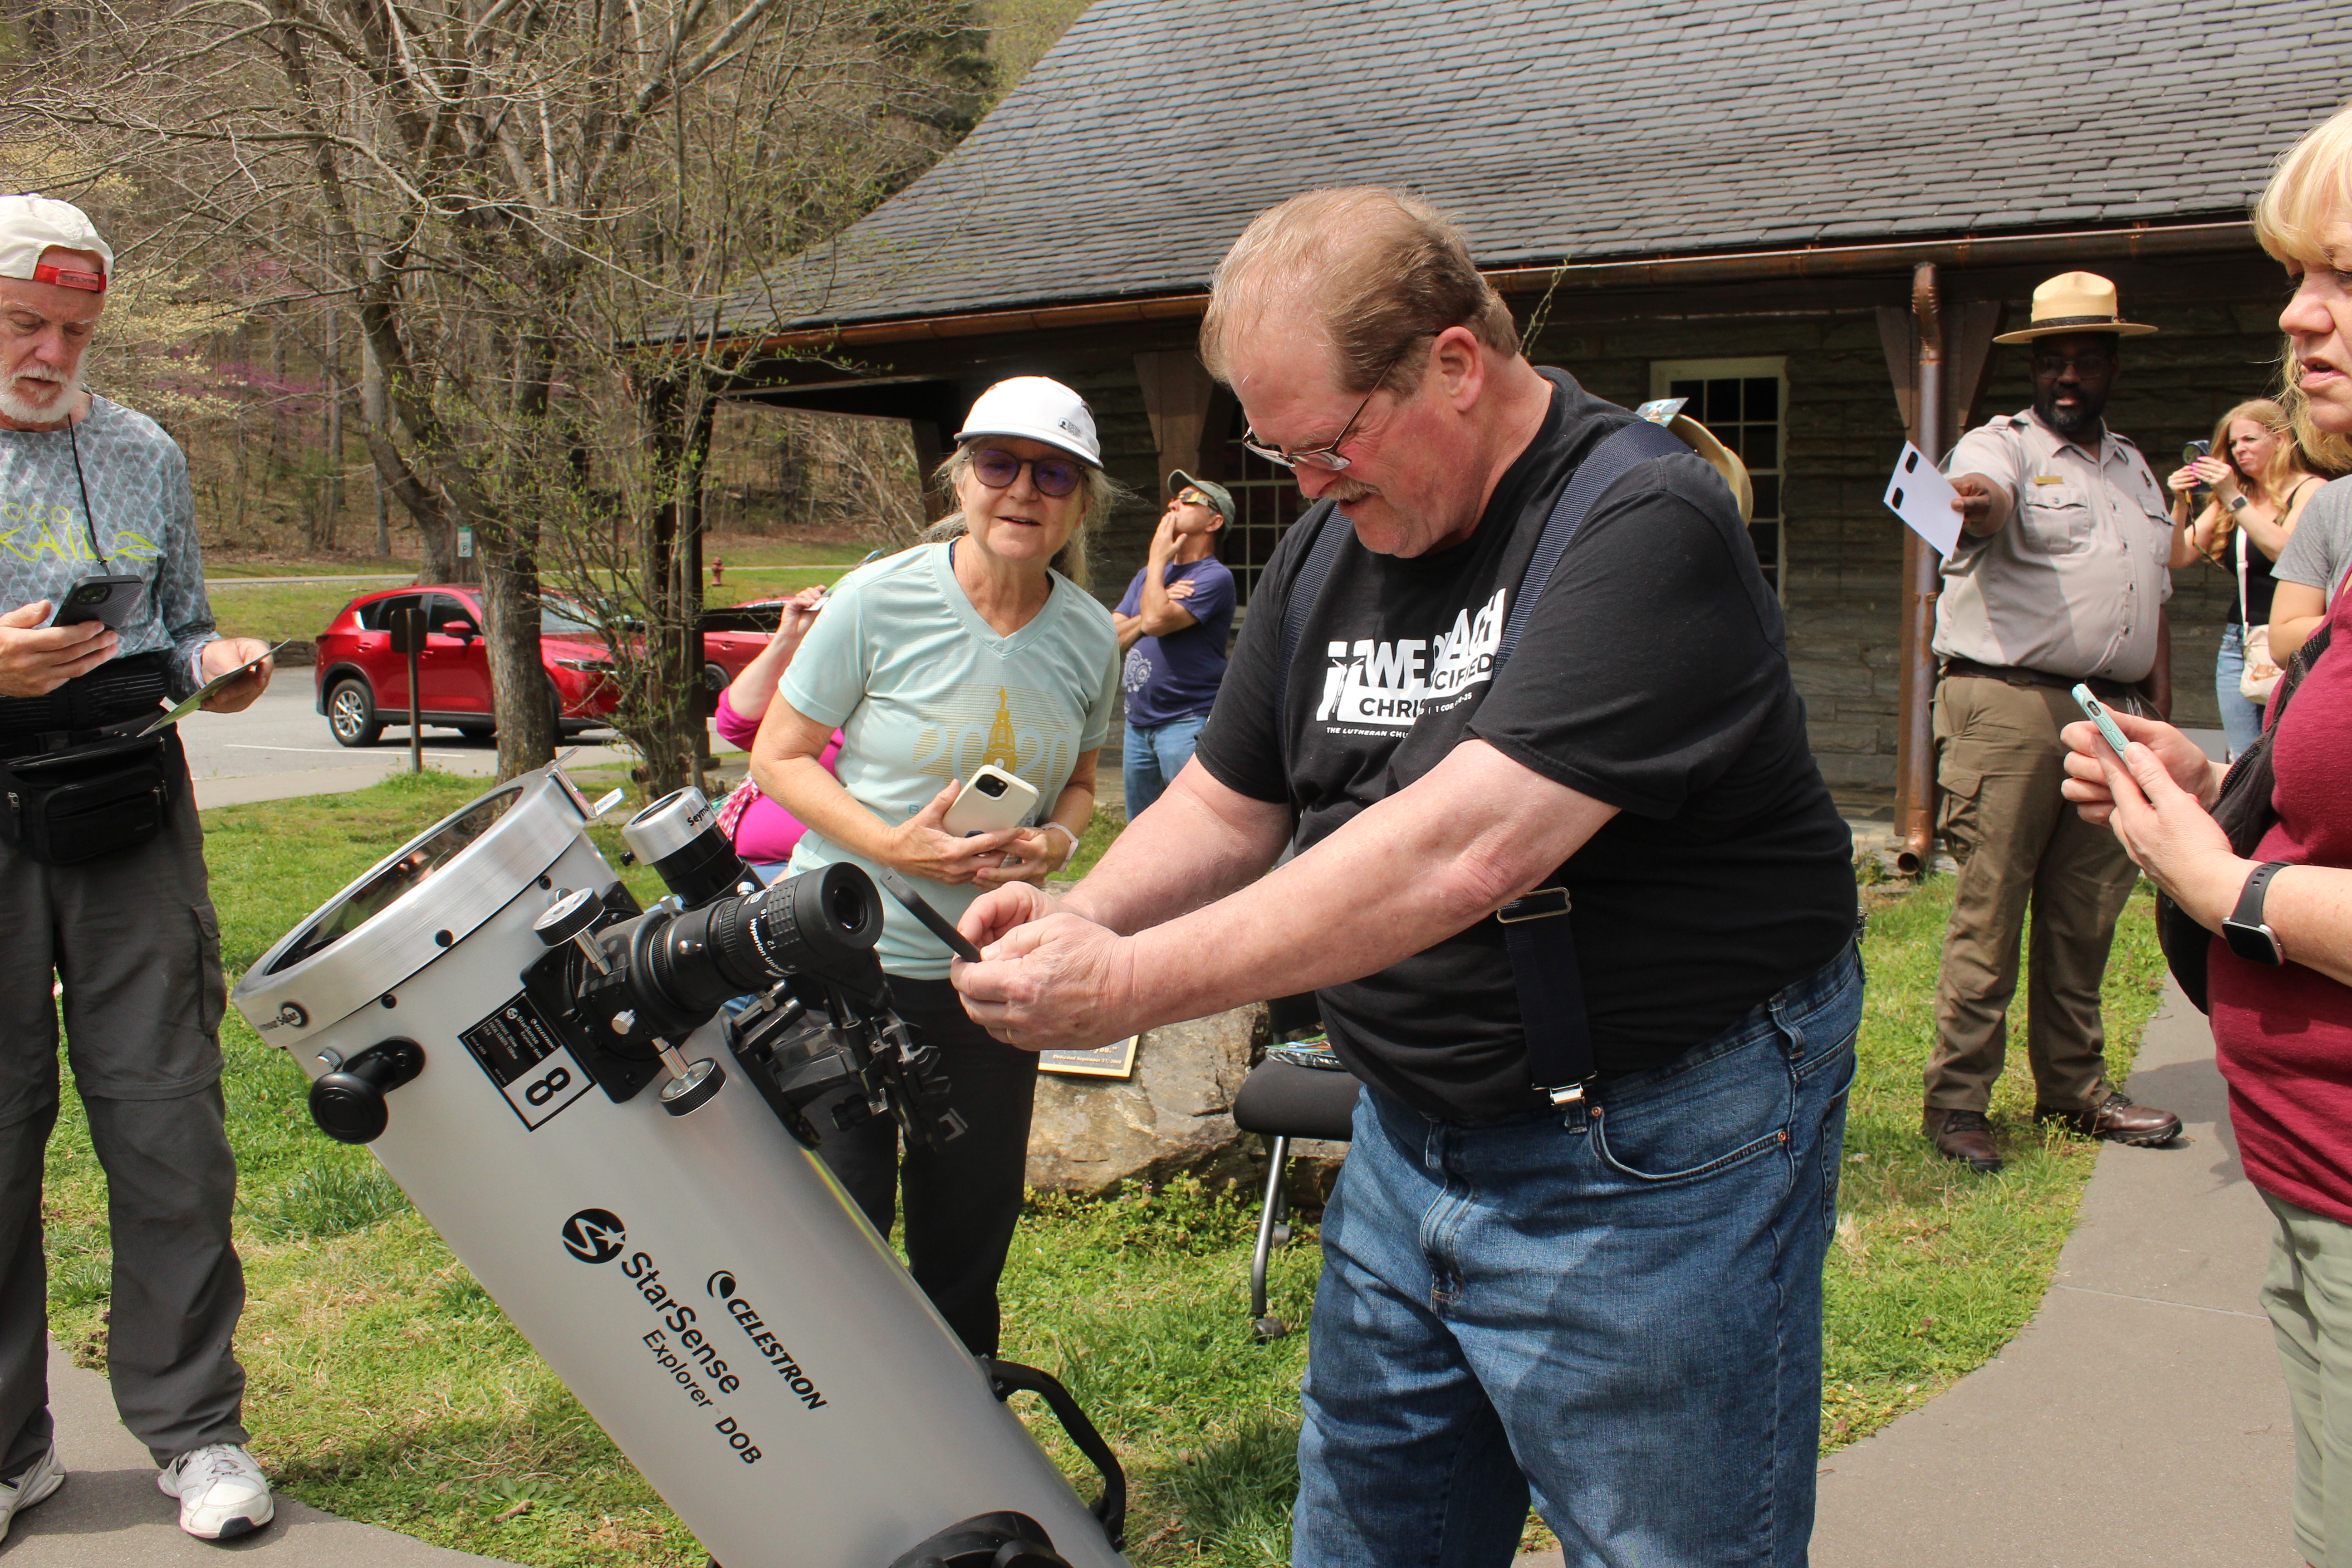 An Illinois resident named Tim visited the park for the eclipse on Monday, pictured here trying to capture a photo of the eclipse through the telescope provided by the National Park Service.